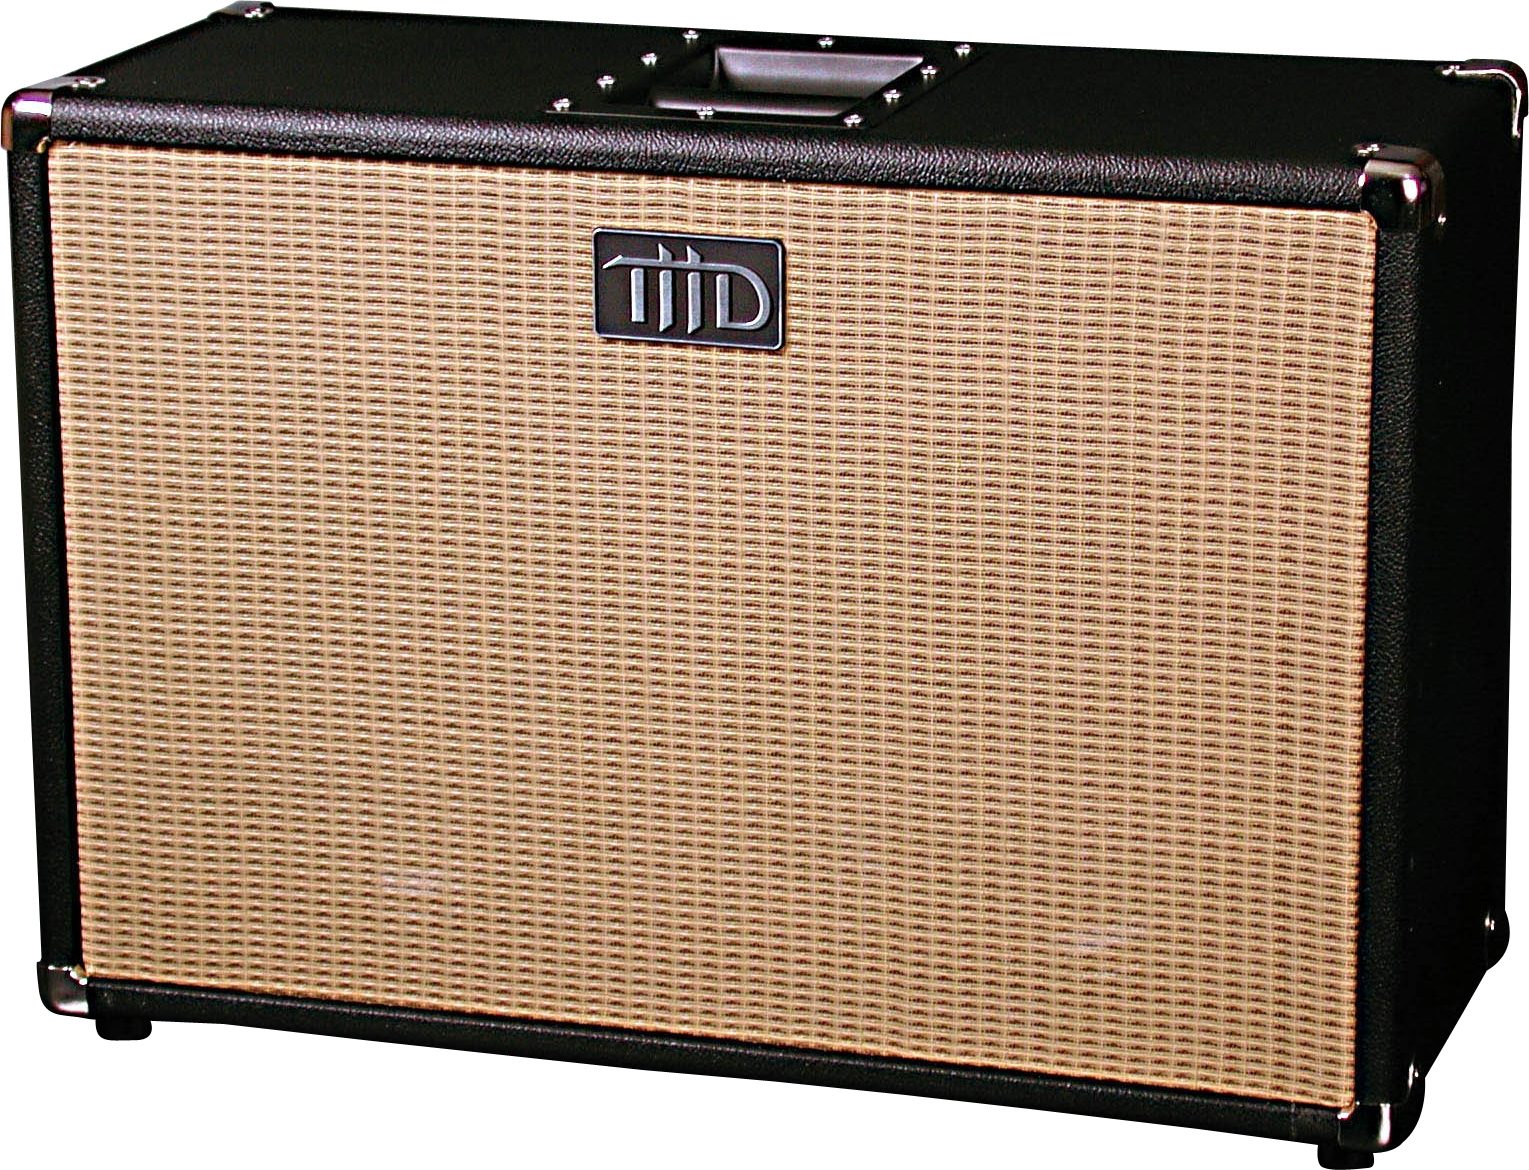 Thd 212 Extension Guitar Speaker Cabinet Zzounds